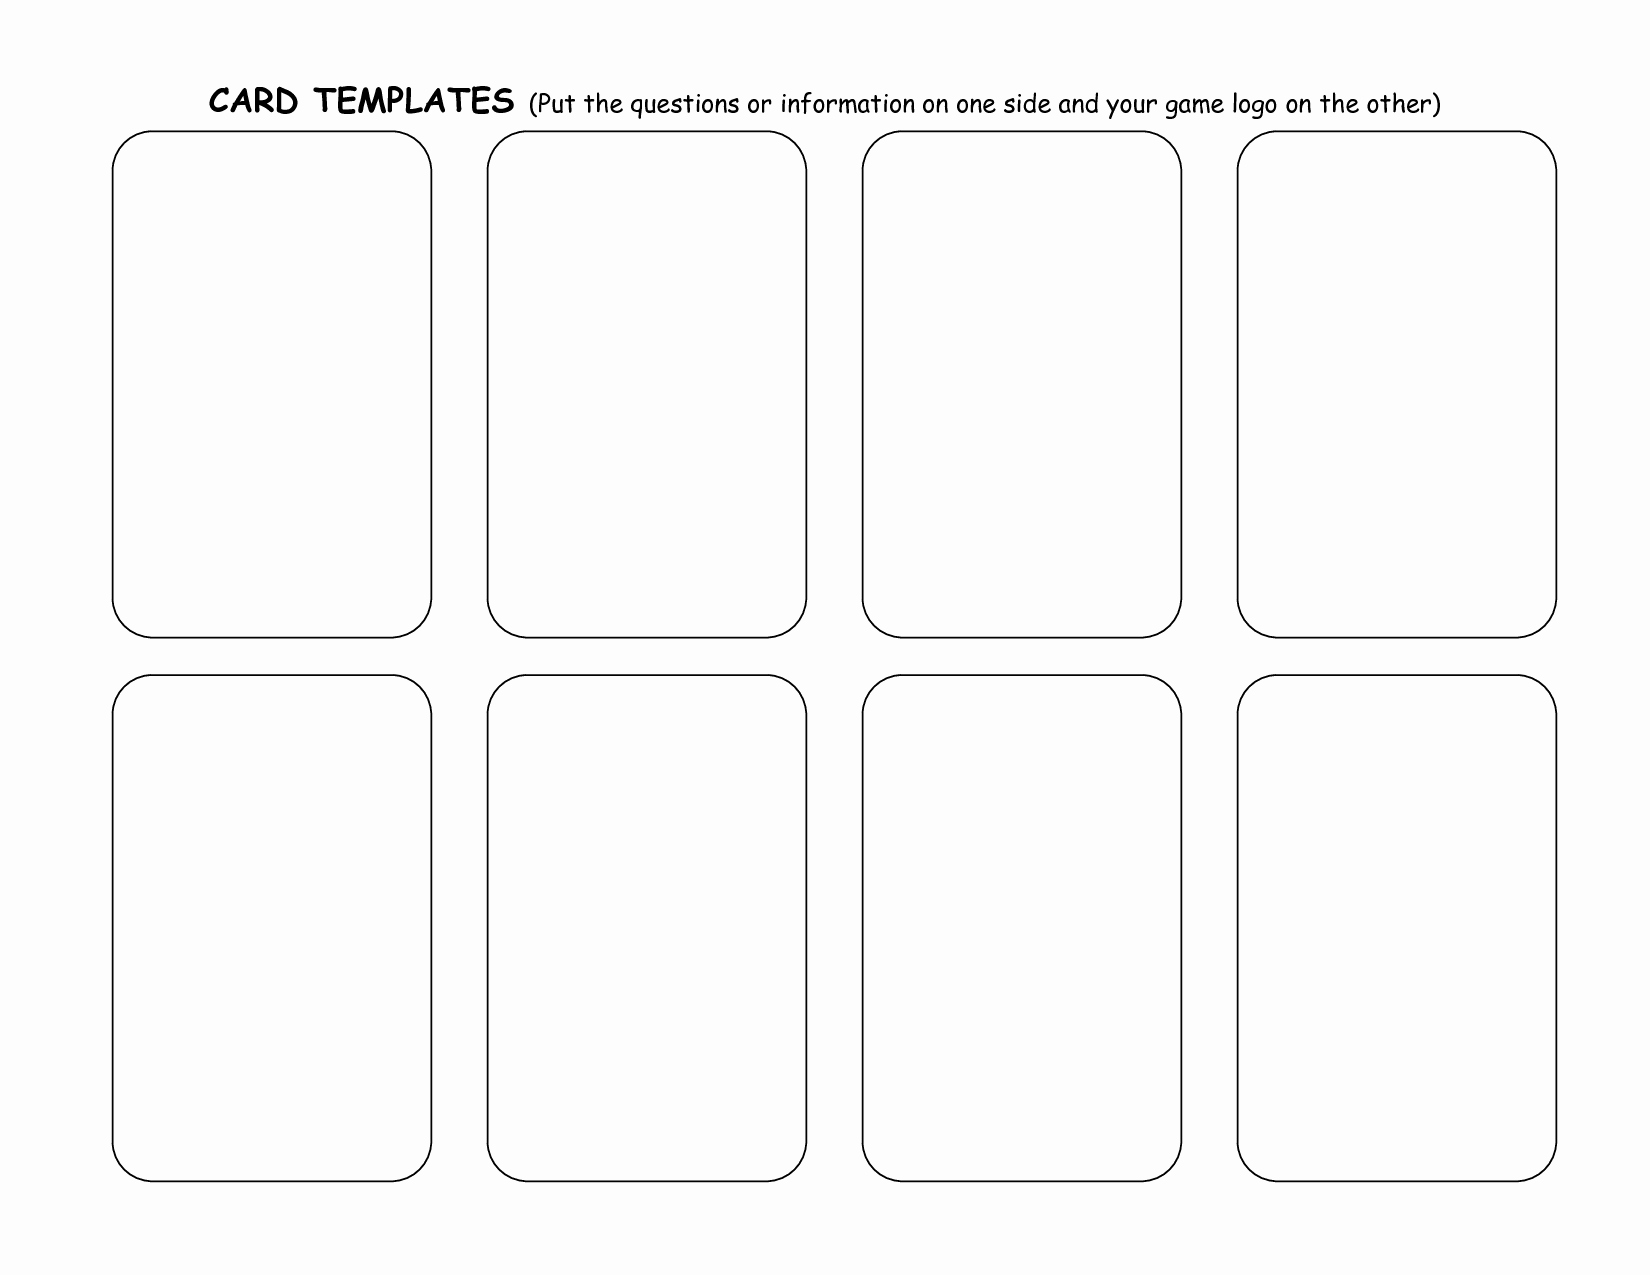 Greeting Cards Templates for Word Fresh Blank Greeting Card Template Word Portablegasgrillweber